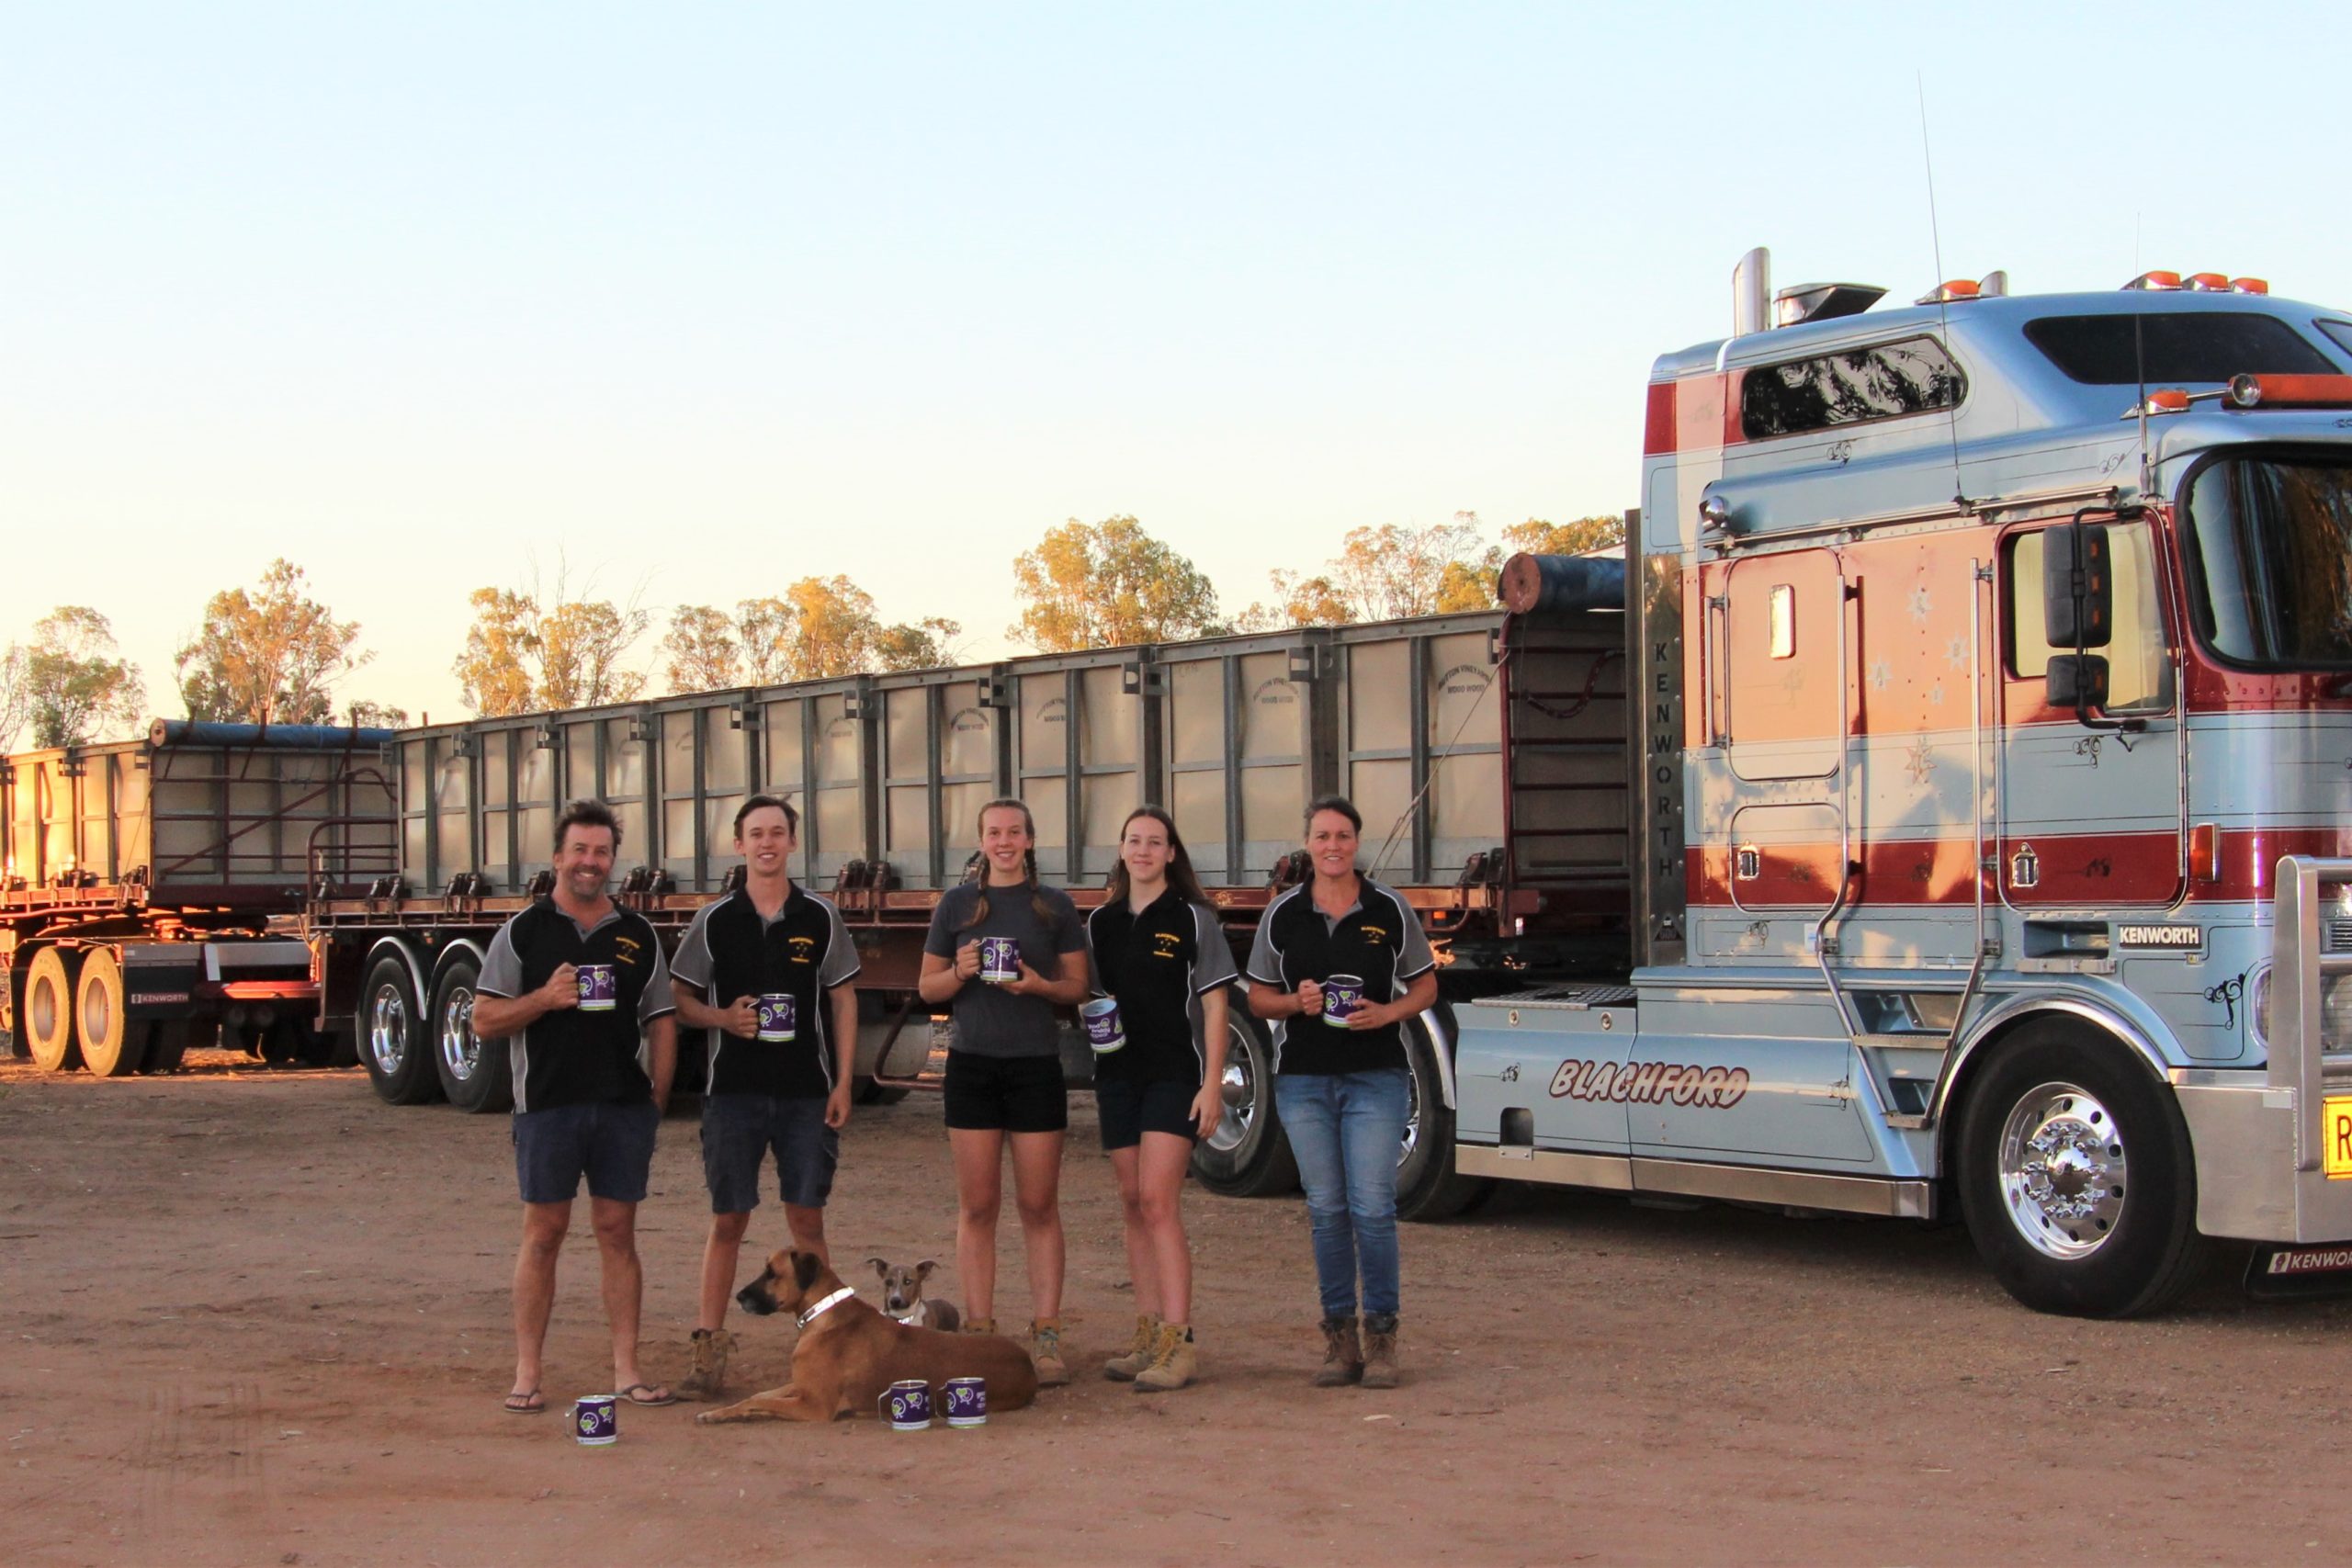 Annette Blachford and her family standing in front of a road train truck, all holding collection tins